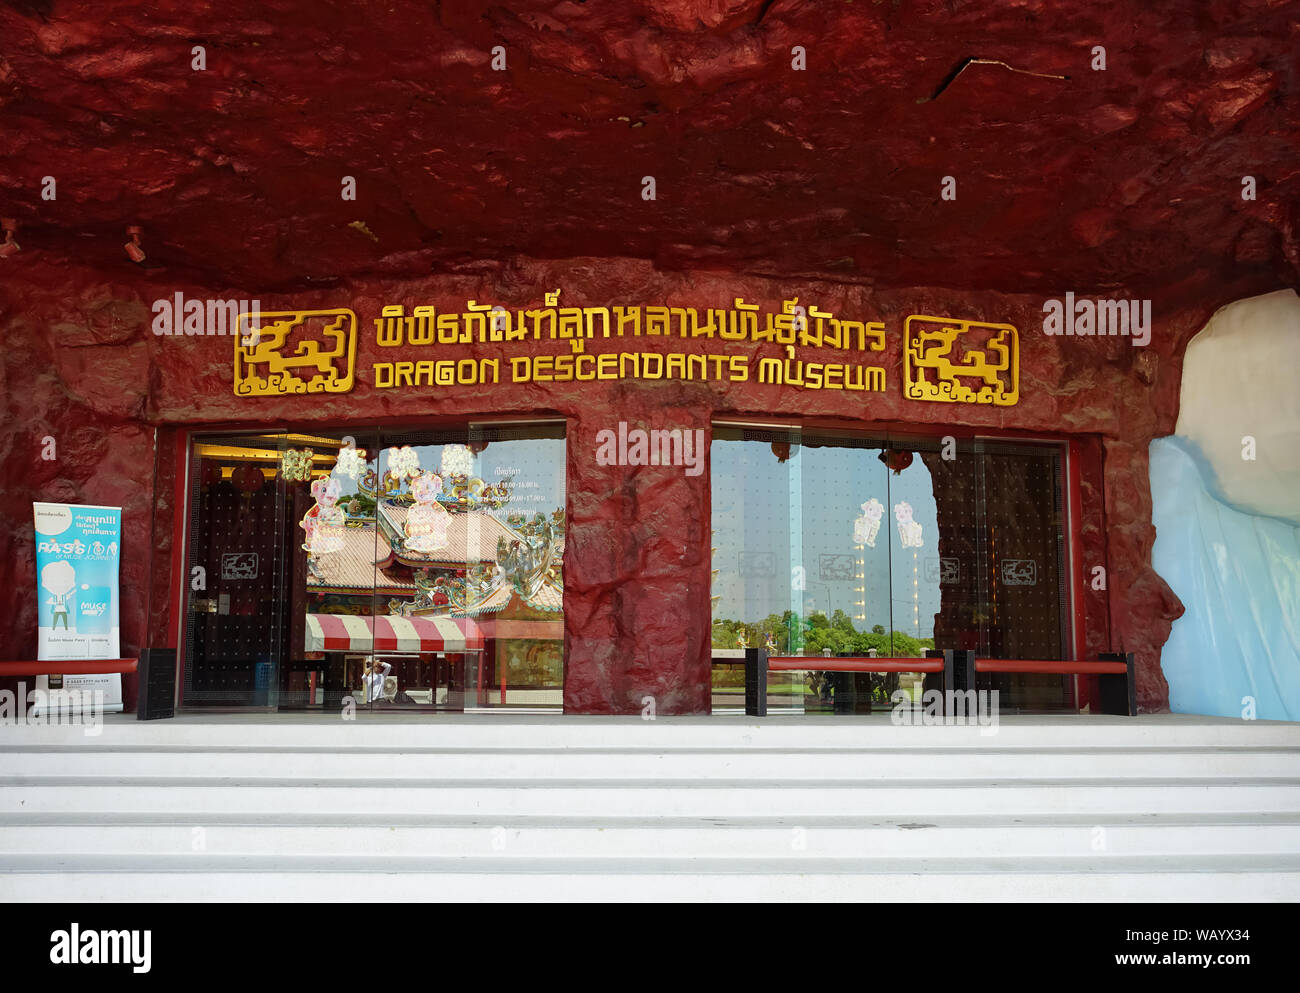 Suphan Buri, Thailand - May 25, 2019: Entrance of Dragon descendants museum in Suphan buri province, Thailand. Stock Photo